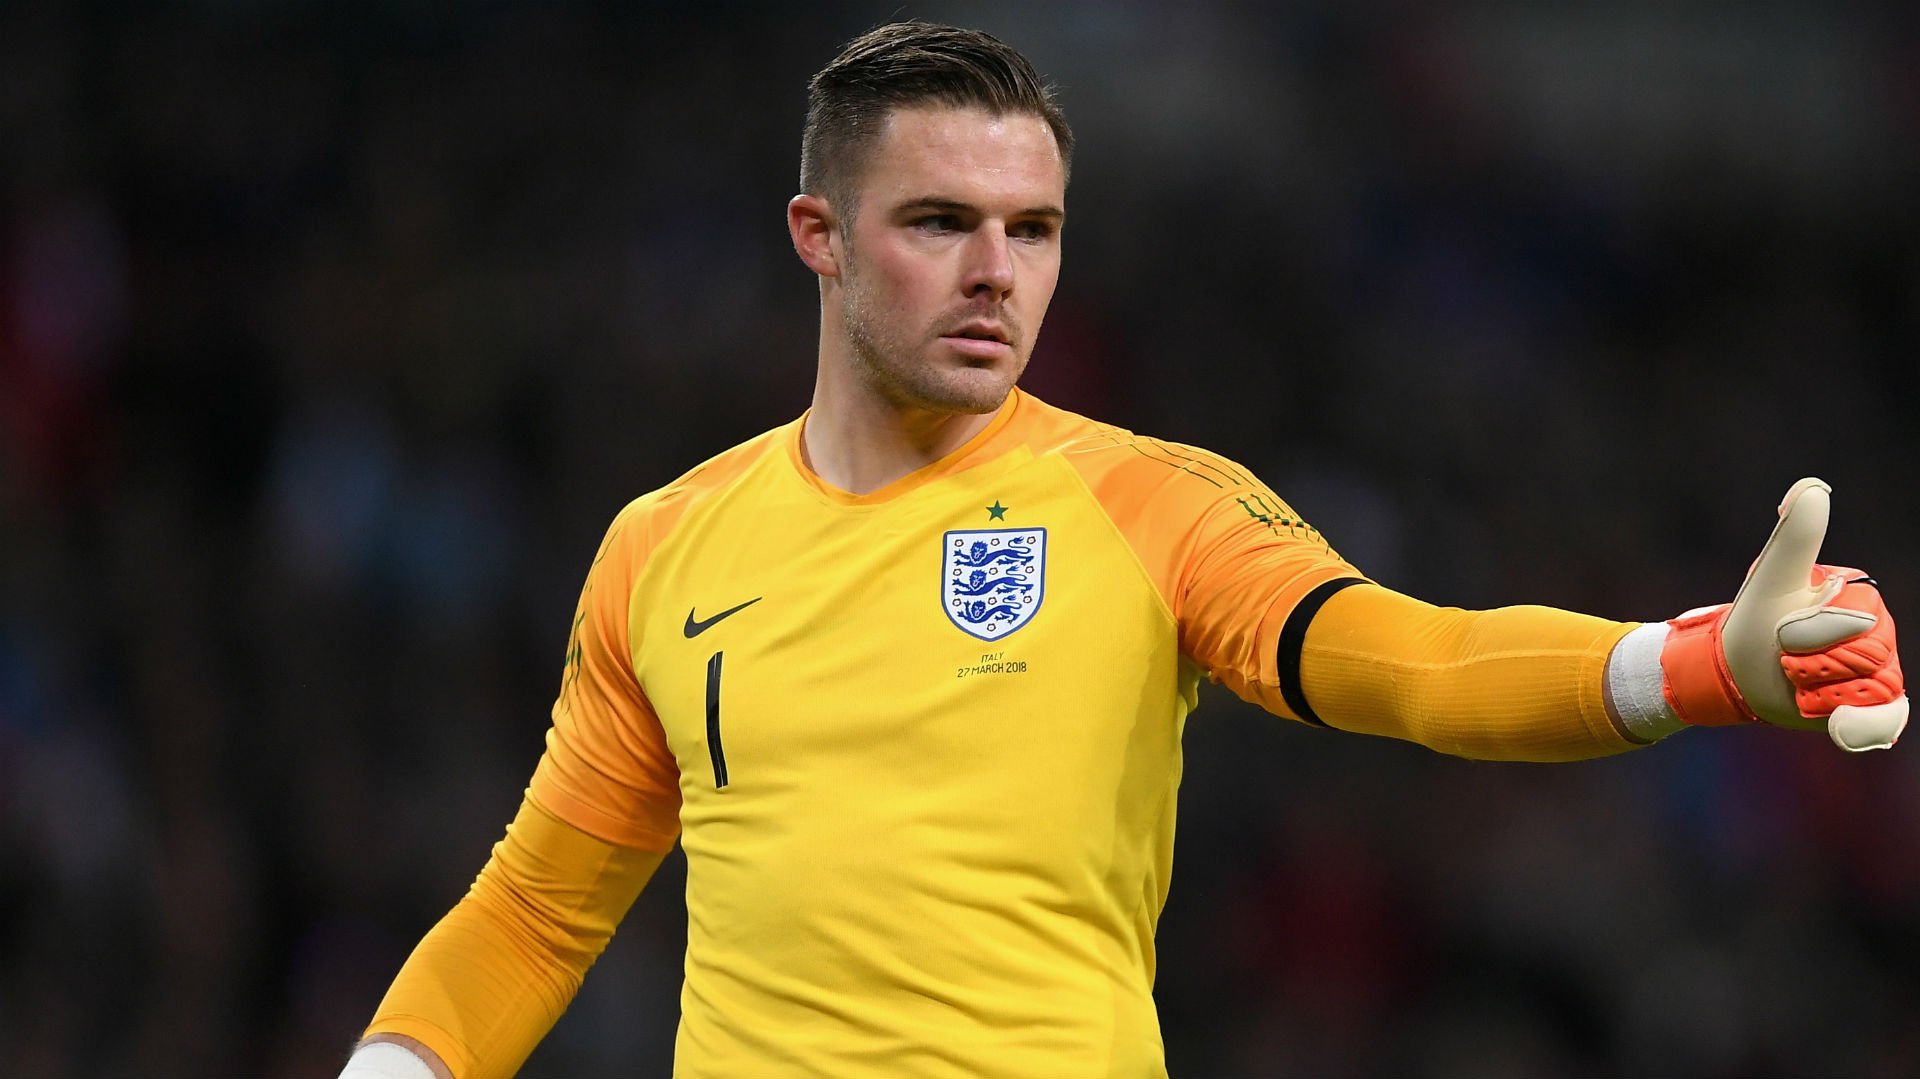 Jack Butland age, salary, net worth, girlfriend, Career and much more